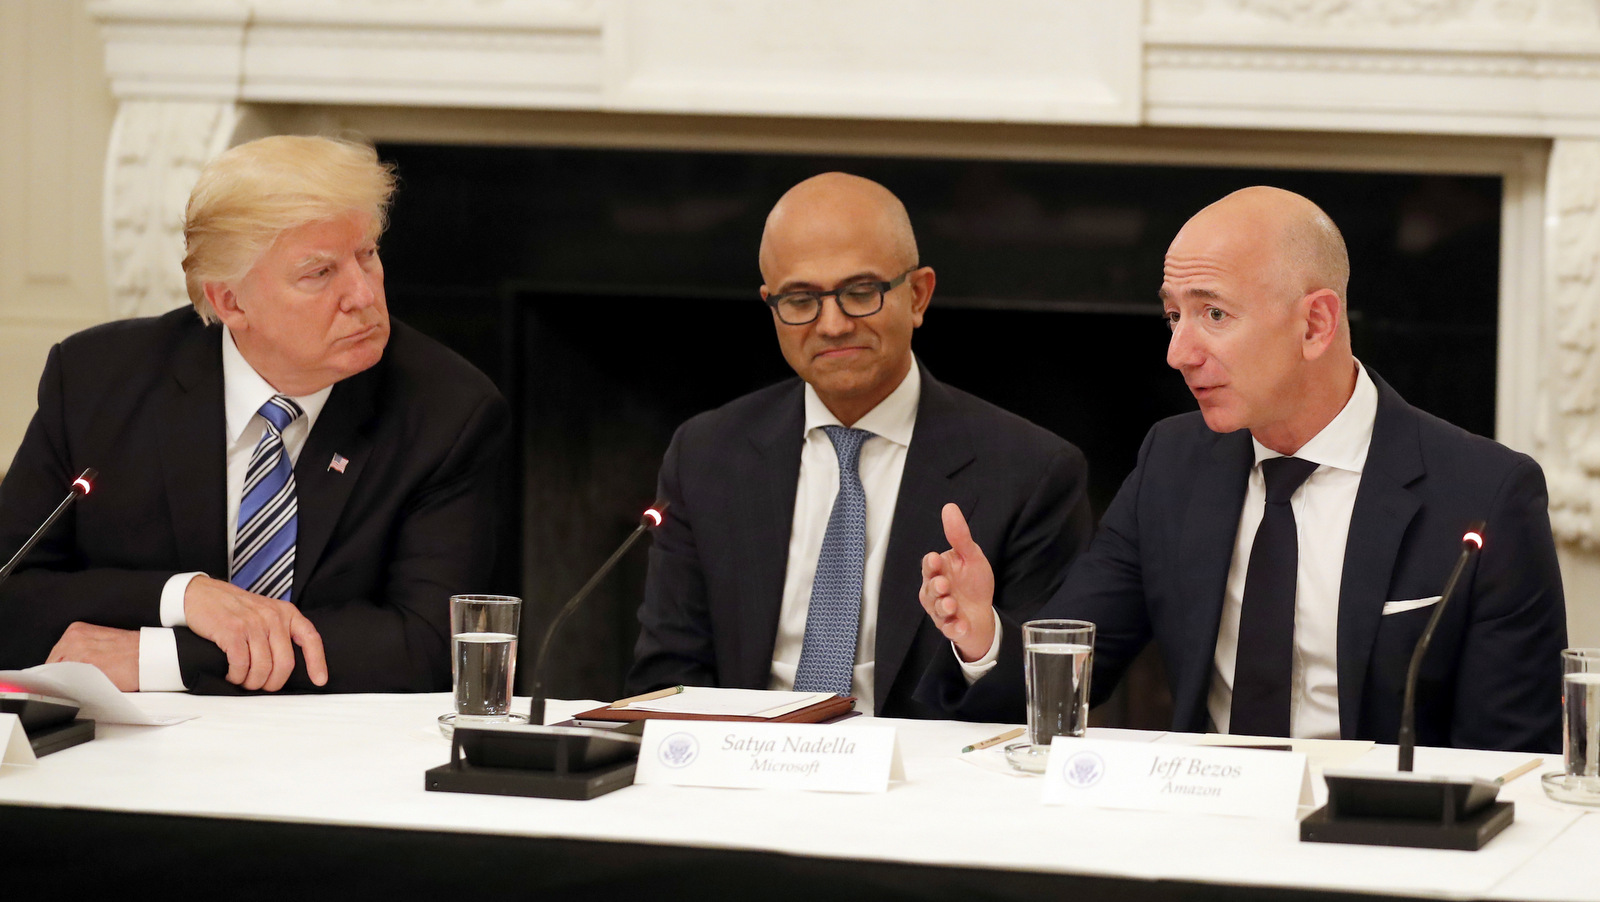 President Donald Trump, left, and Satya Nadella, Chief Executive Officer of Microsoft, center, listen as Jeff Bezos, Chief Executive Officer of Amazon, speaks during an American Technology Council roundtable in the State Dinning Room of the White House, June 19, 2017, in Washington. (AP/Alex Brandon)